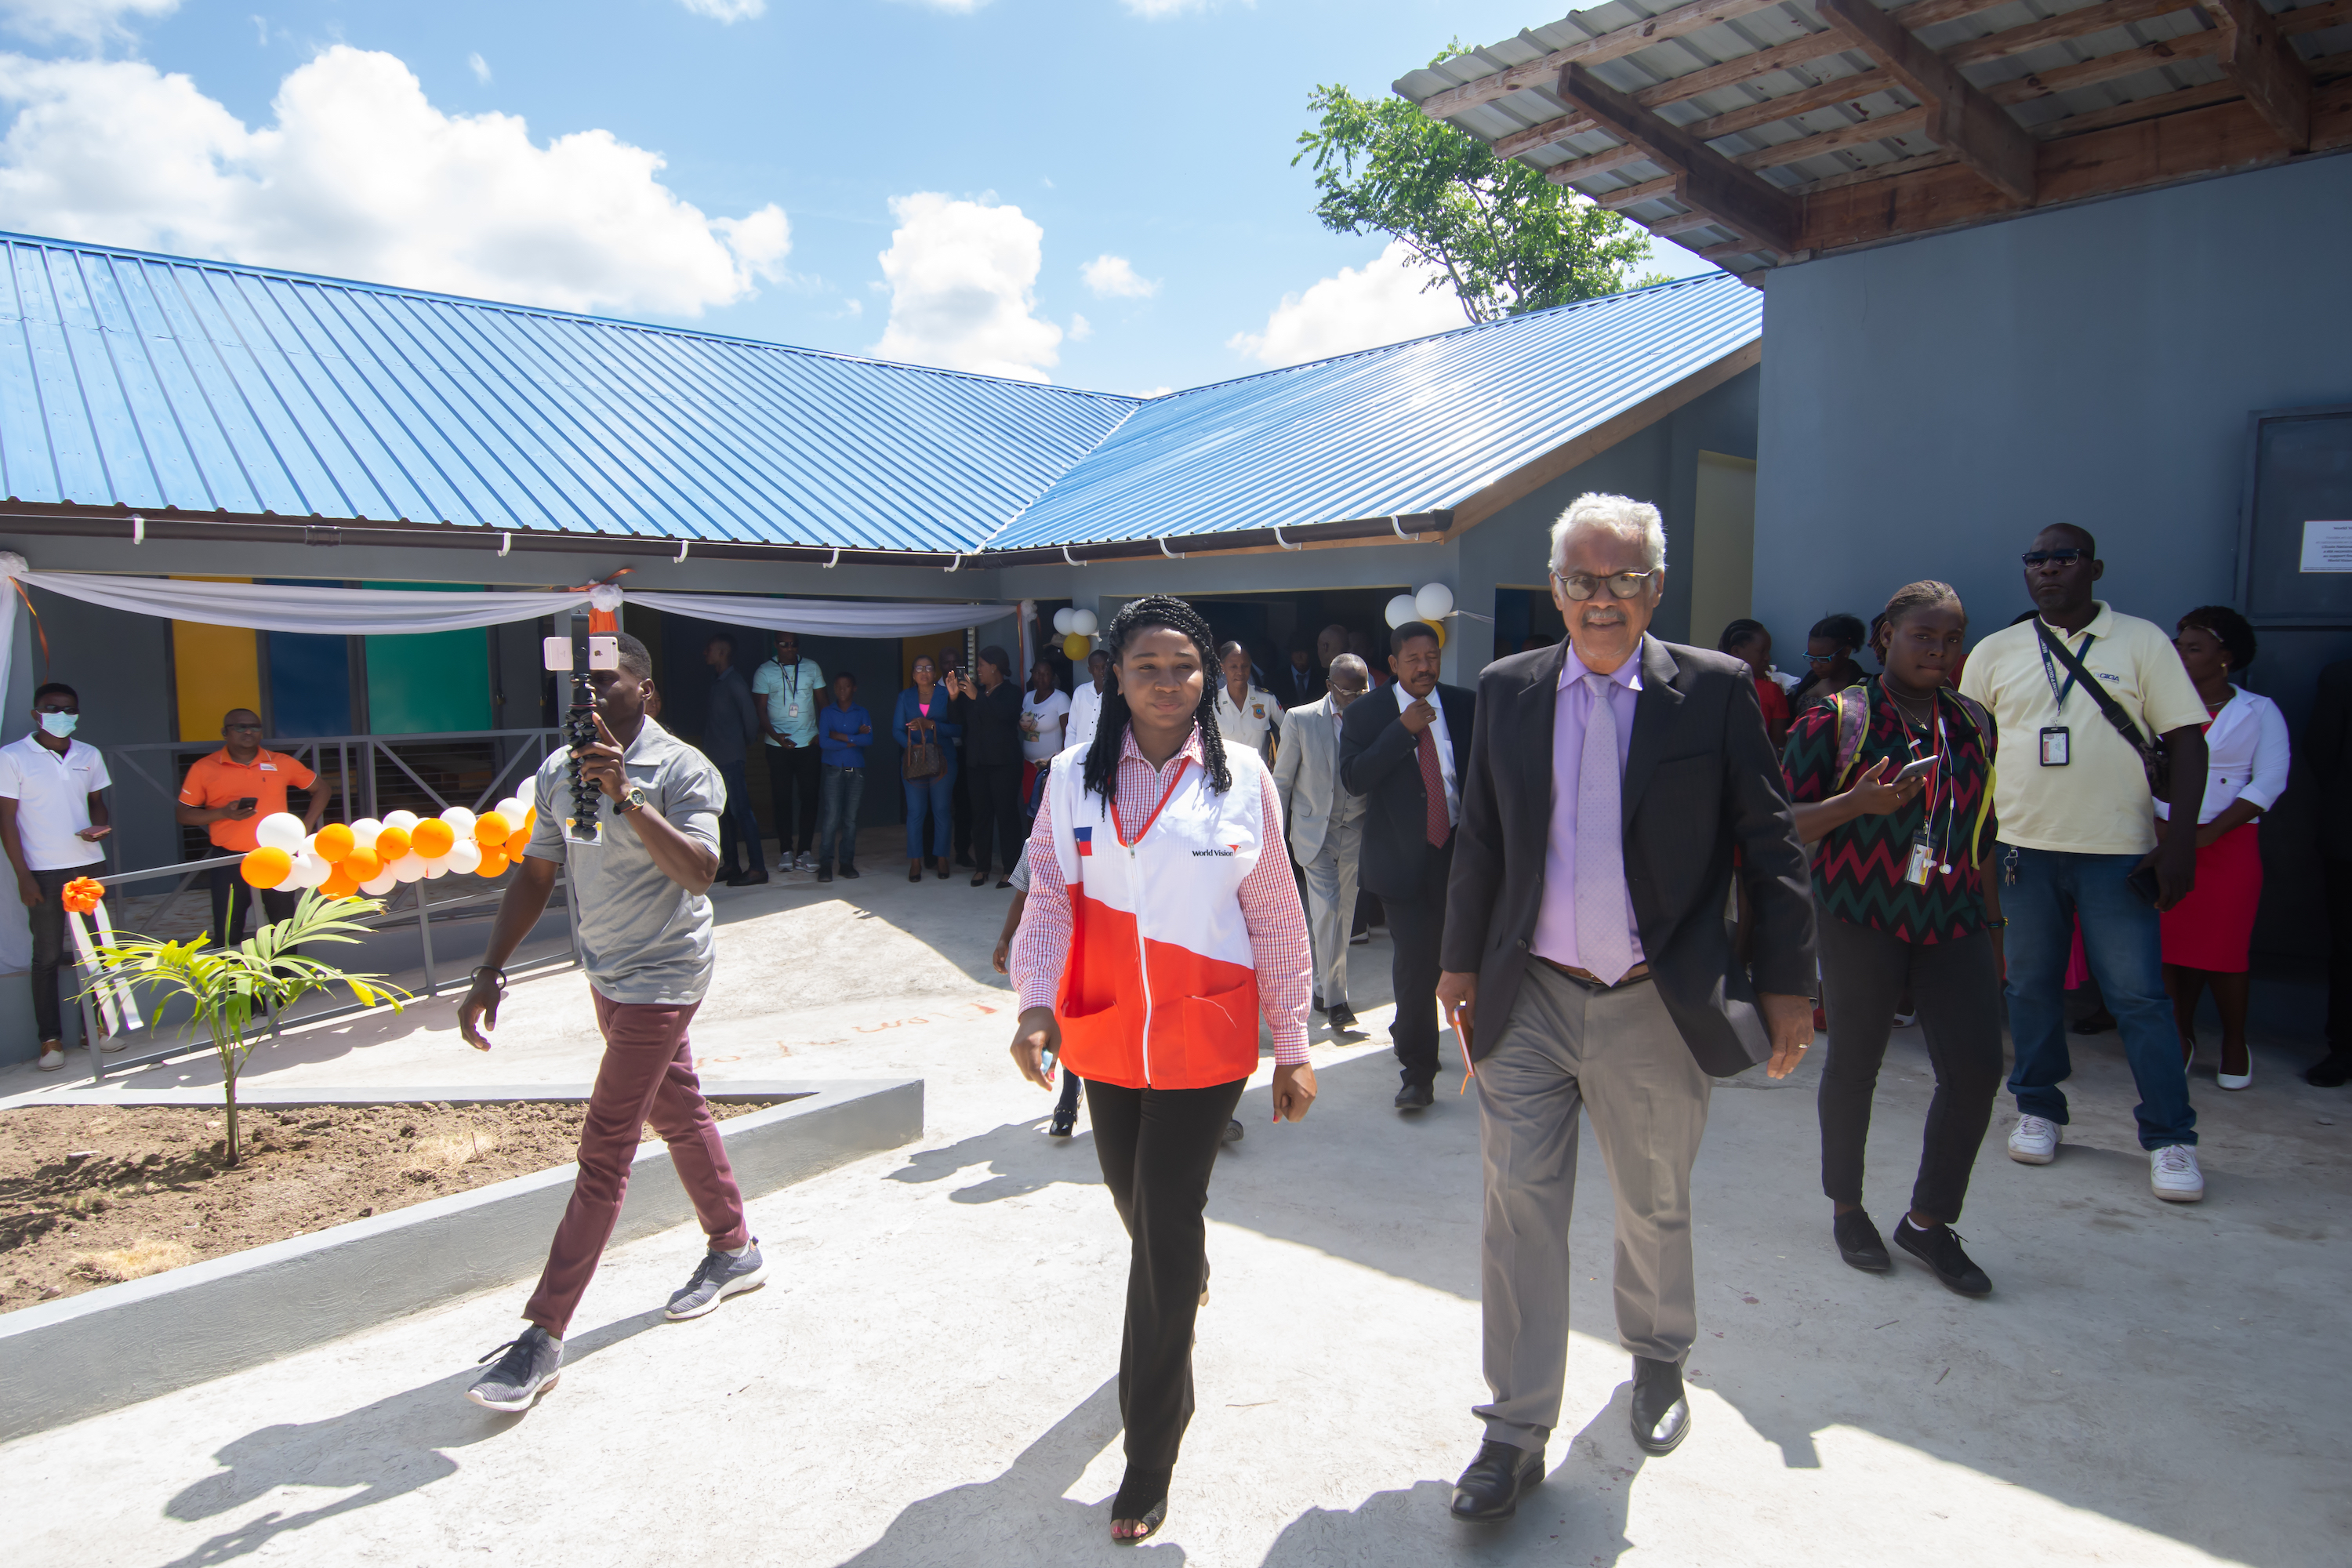 Anne Mosie Dieu, Emergency Response Coordinator takes M. Auguste D'Meza on a tour of the school